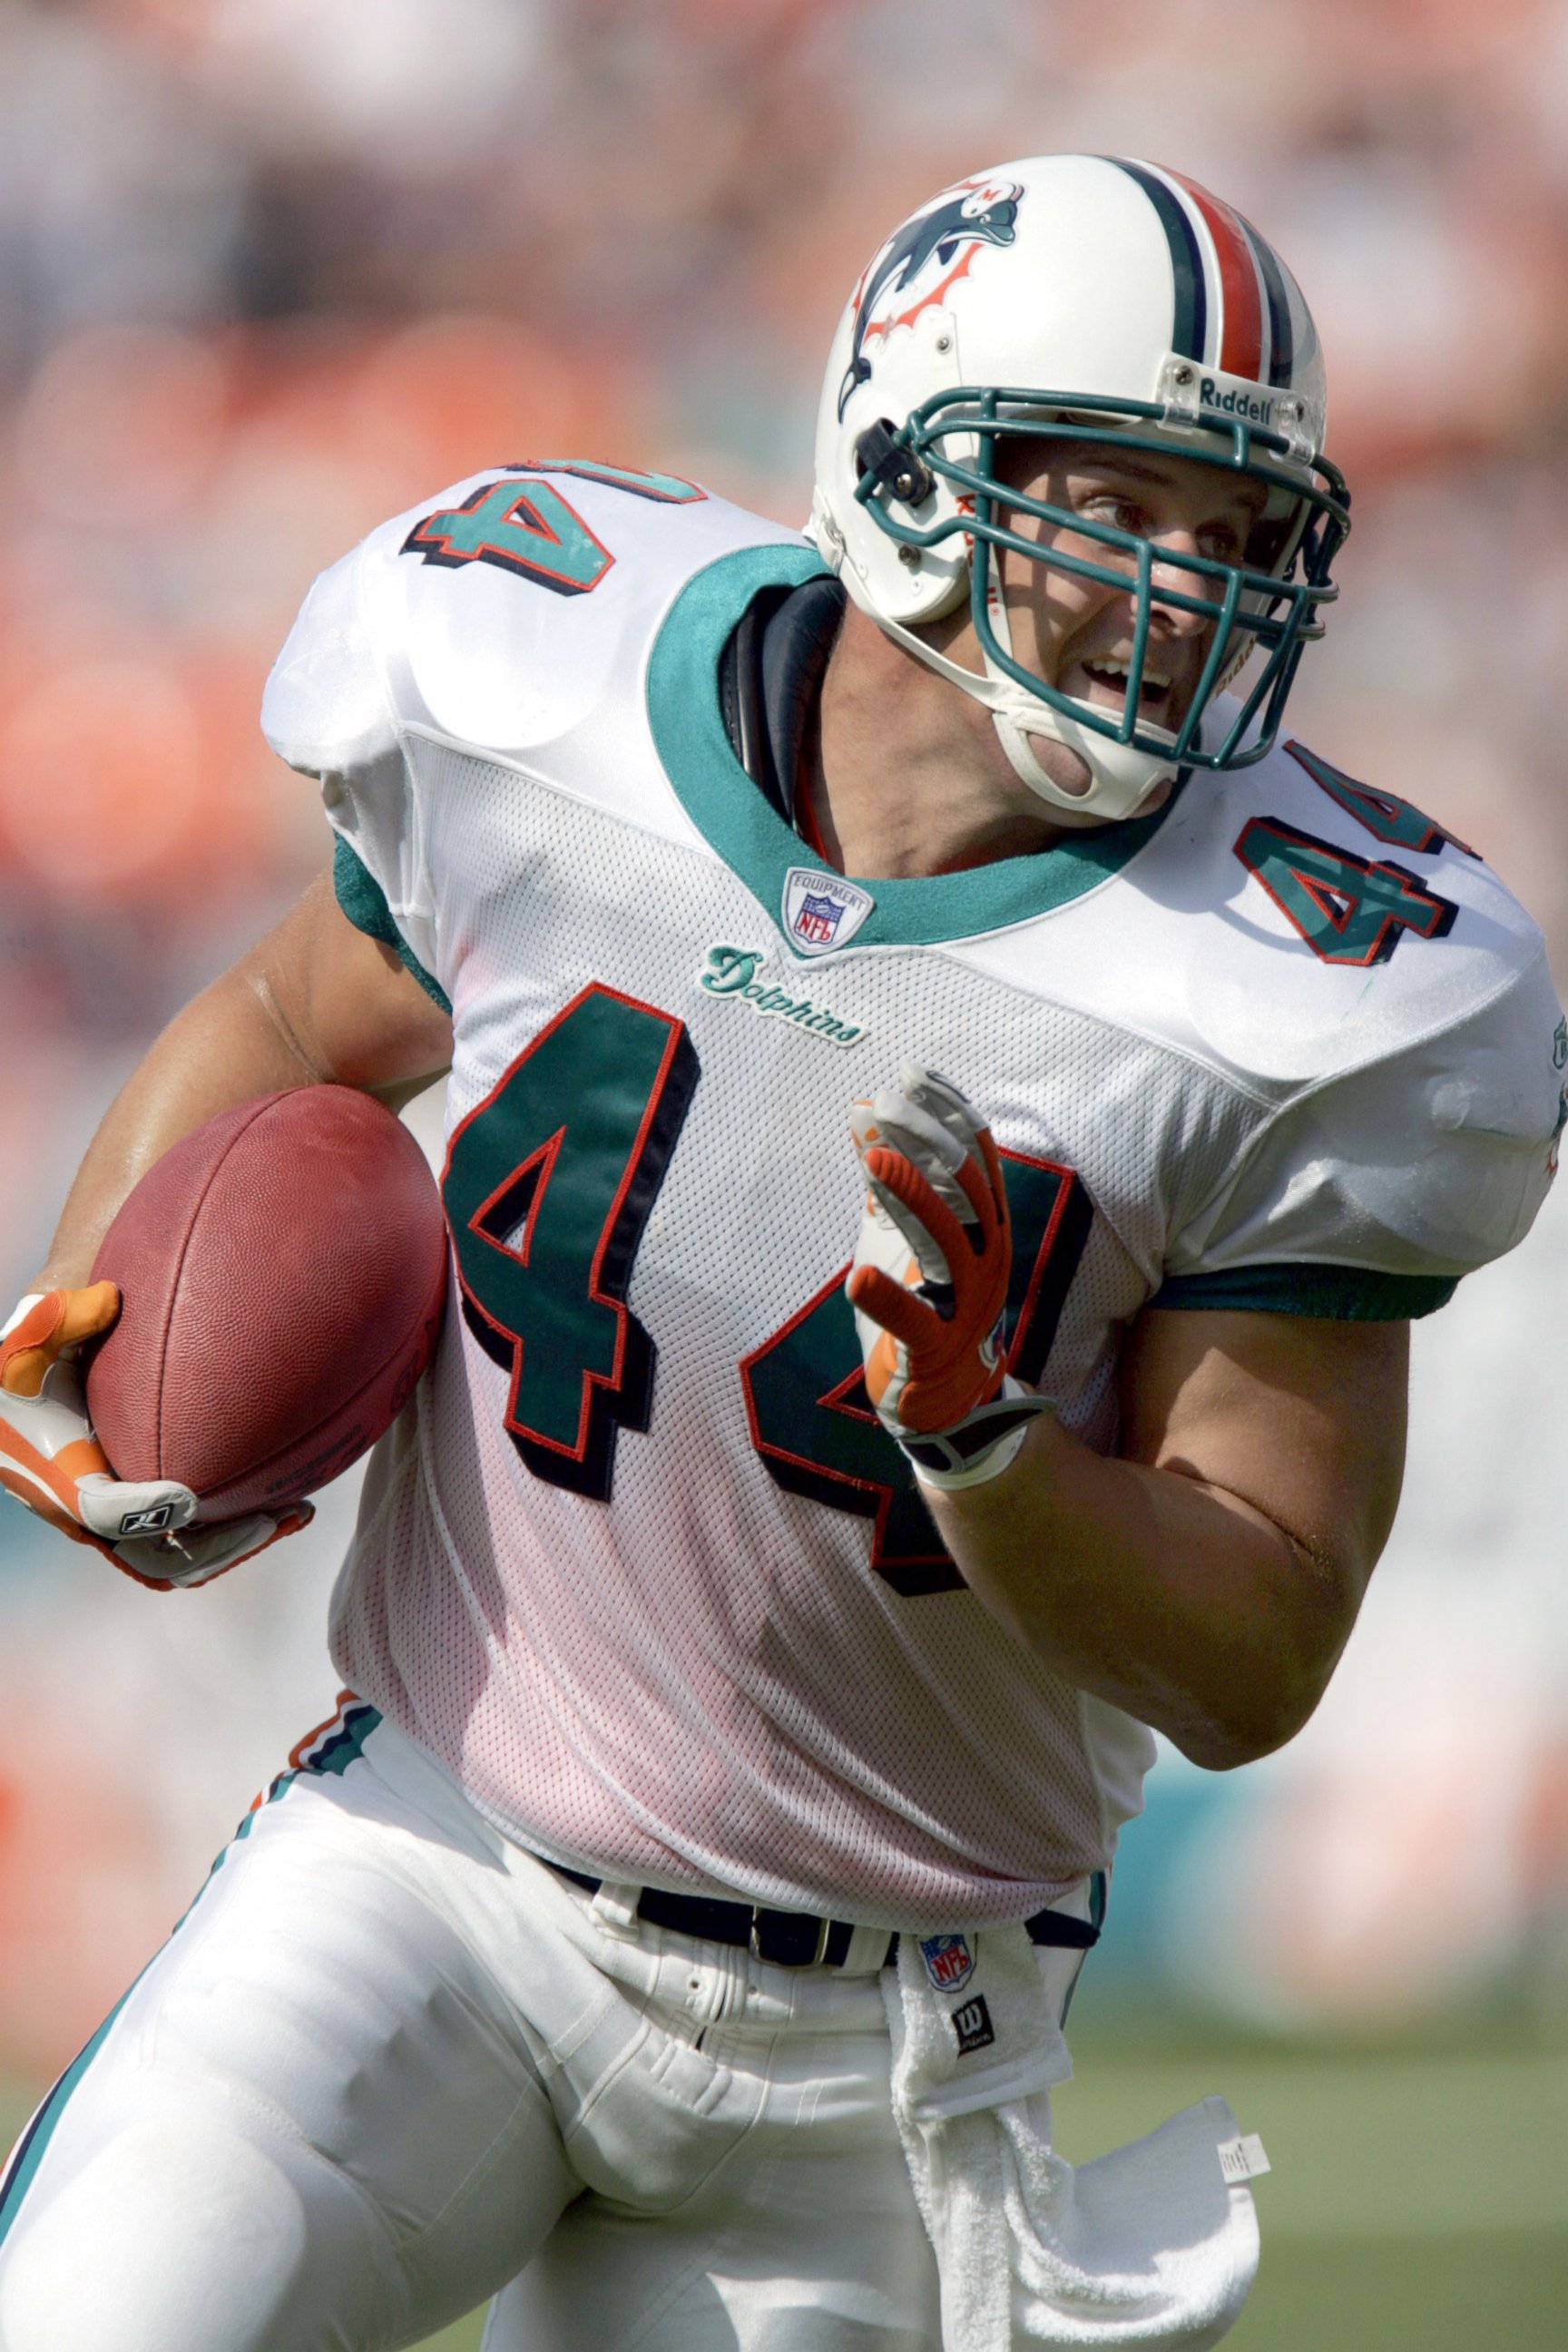 PHOTO: Fullback Rob Konrad #44 of the Miami Dolphins heads into the end zone for a touchdown against the Arizona Cardinals in Miami, Fla., in this Nov. 7, 2004, file photo.